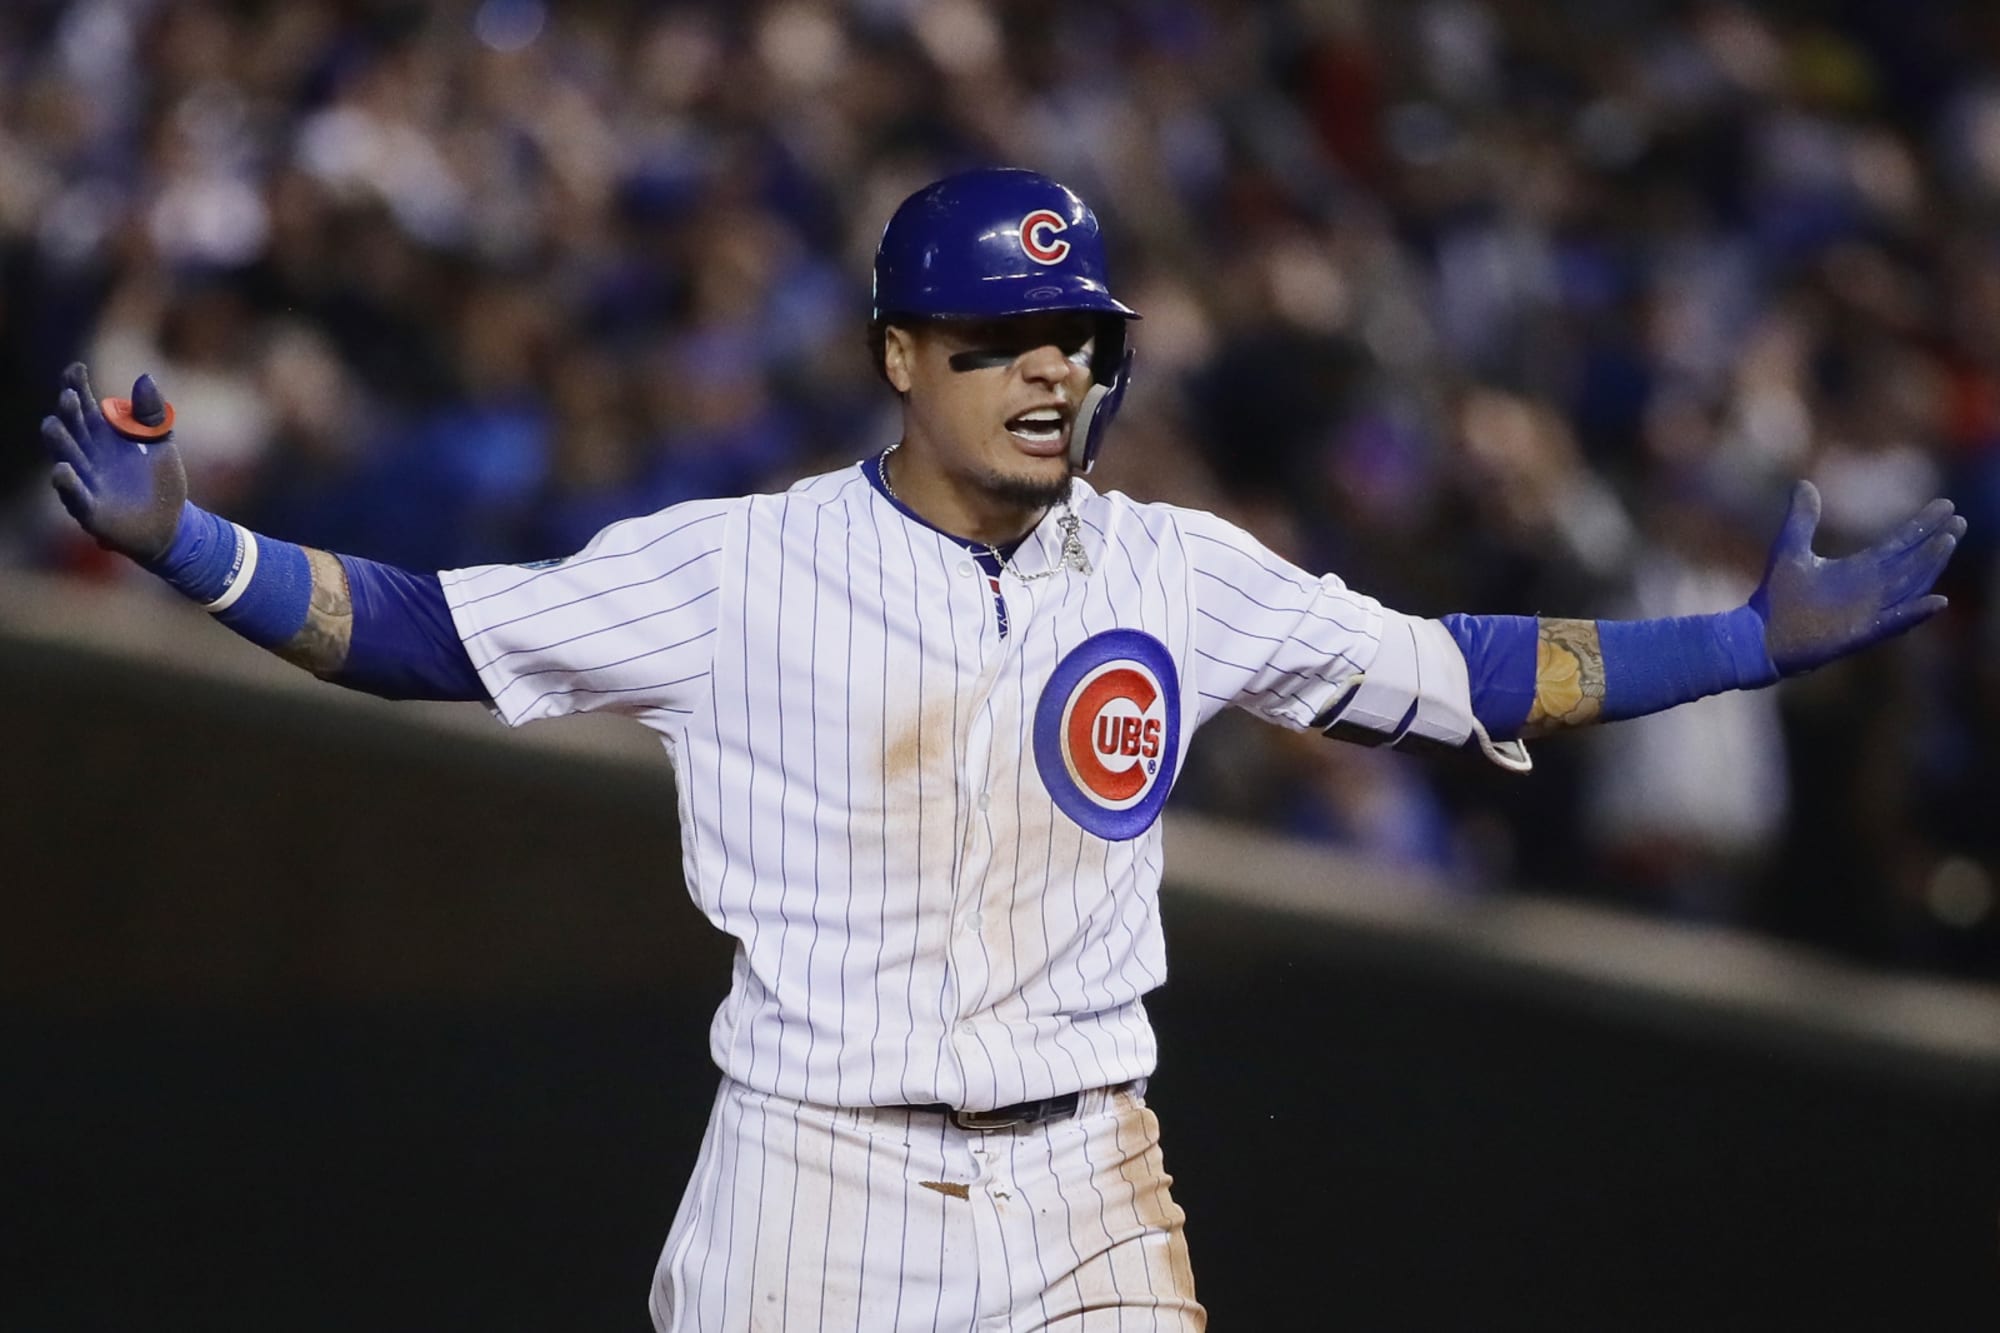 Chicago Cubs: Javier Baez, Kris Bryant, and five others avoid